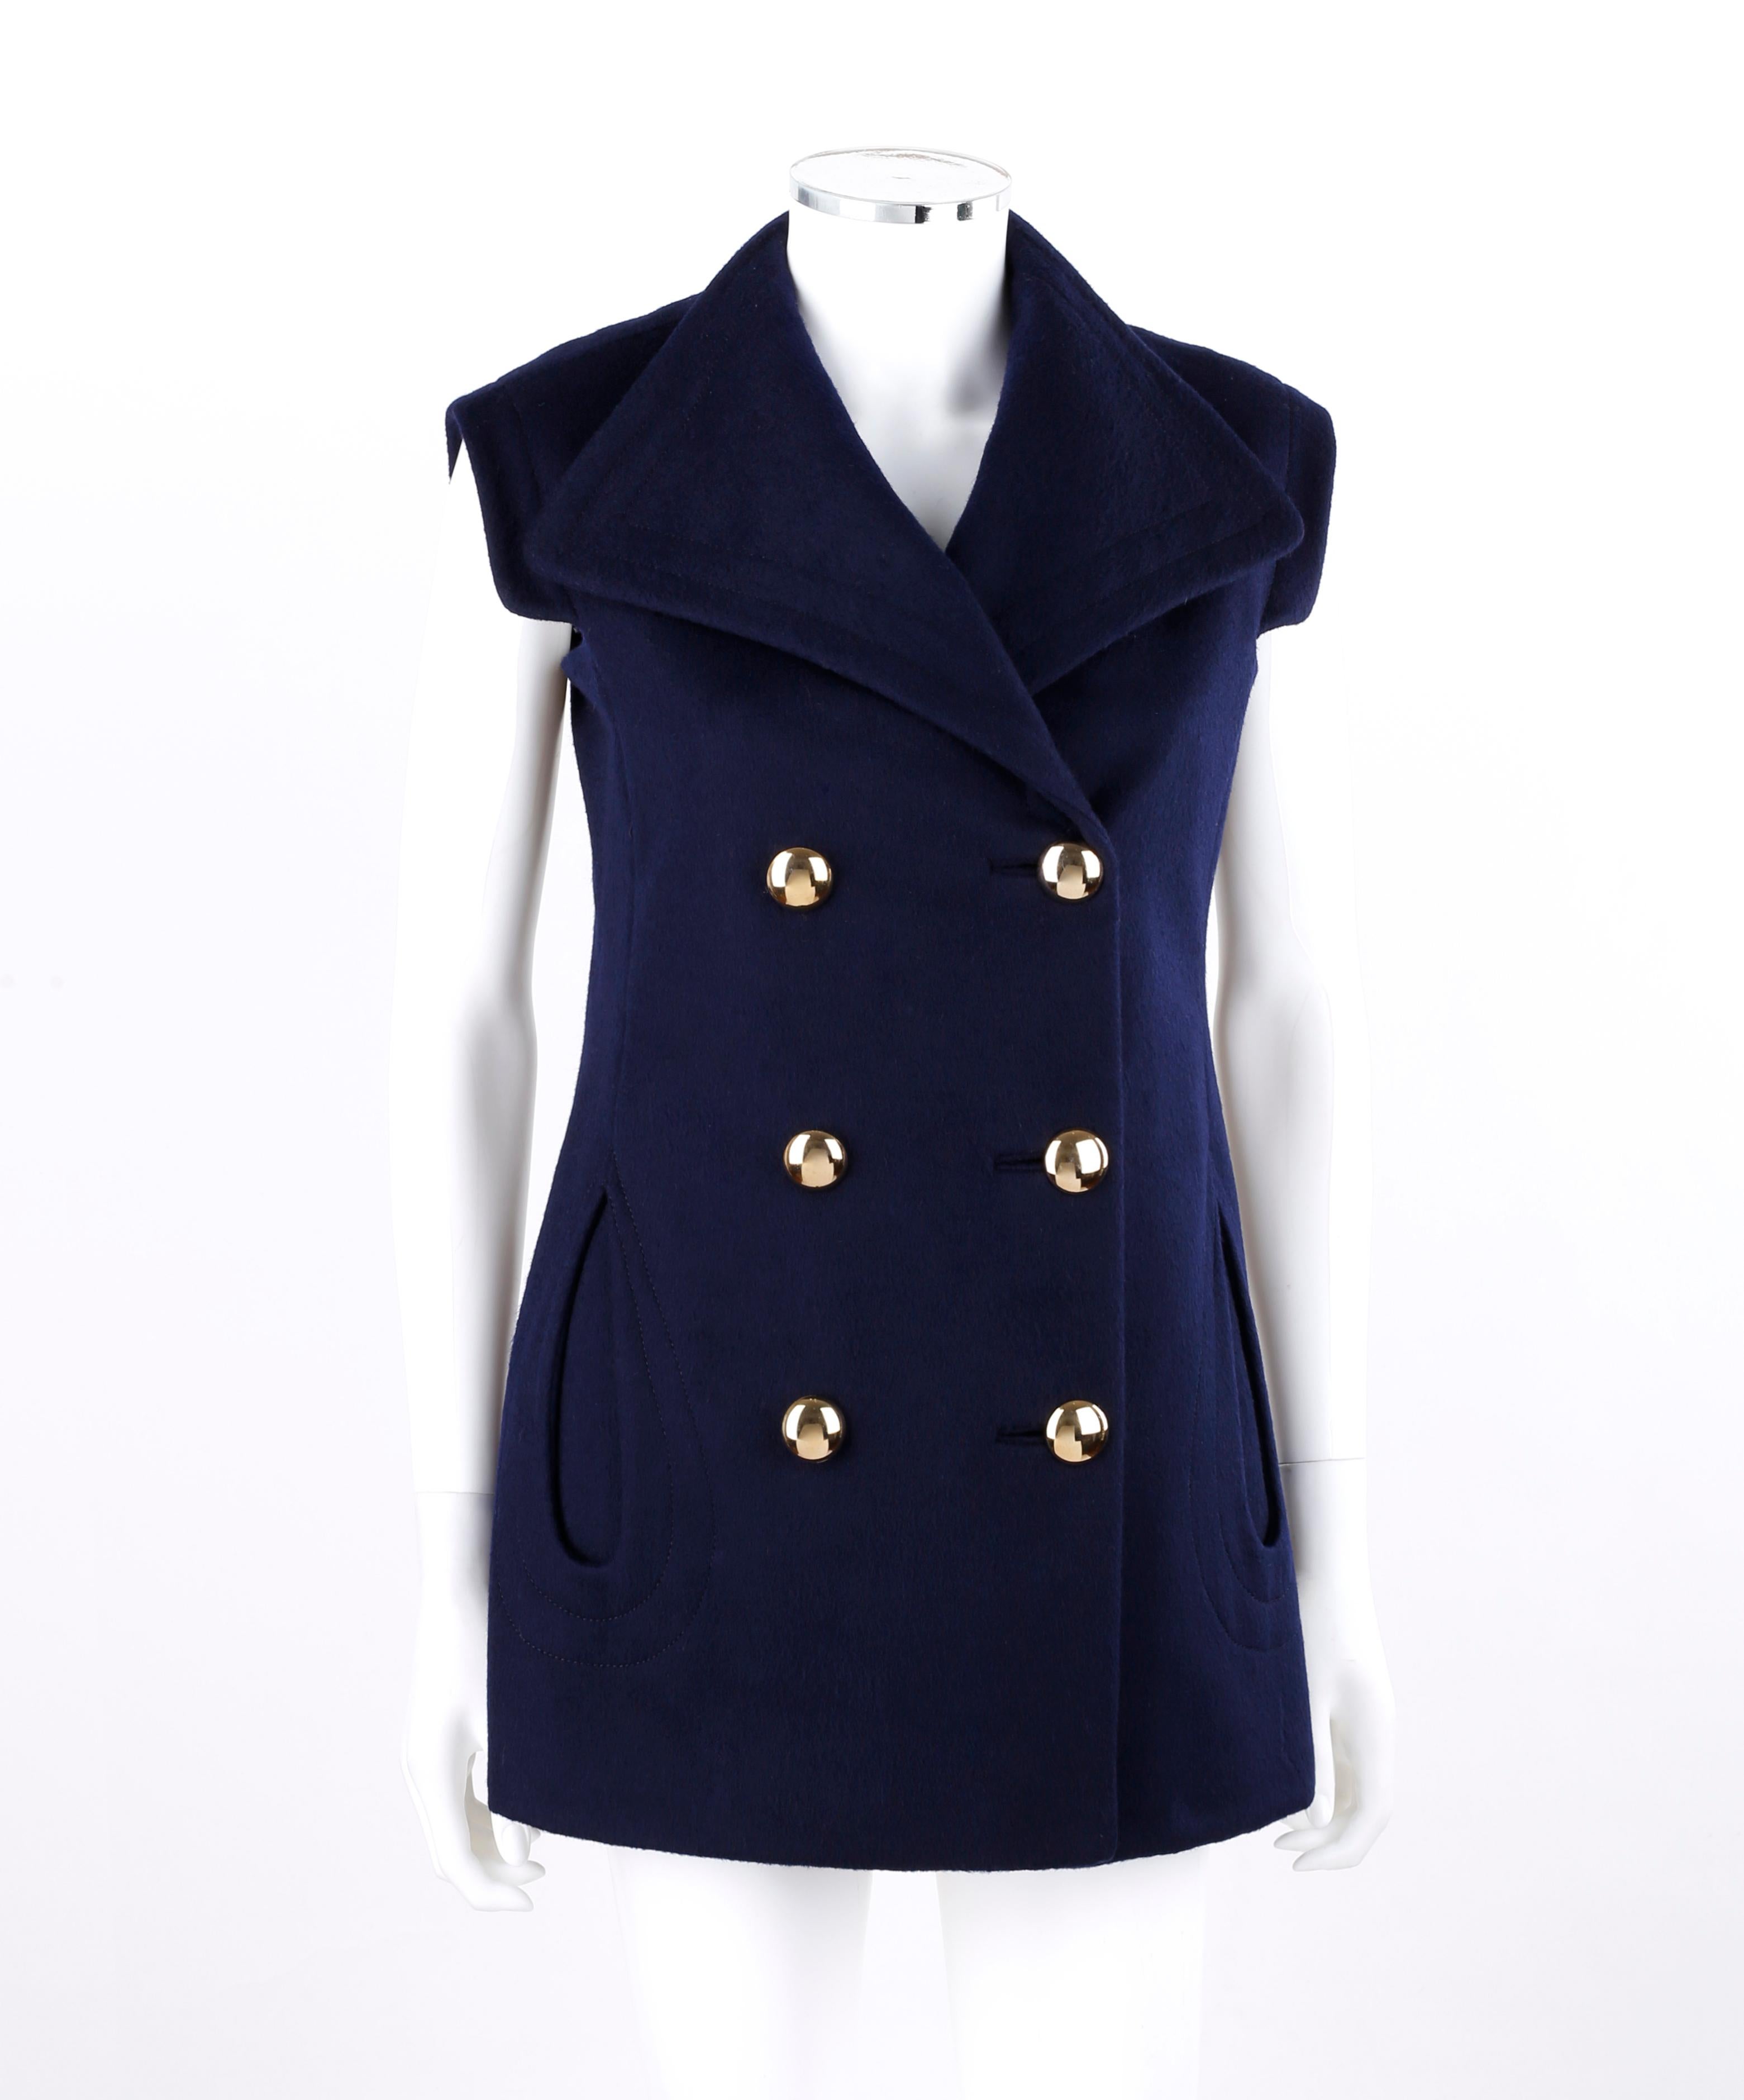 PIERRE CARDIN c.1960’s Navy Blue Extended Shoulder Double Breasted Vest Jacket
 
Circa: 1960’s
Label(s): Pierre Cardin Paris New York; Martha (Palm Beach, New York, Miami Beach)
Designer: Pierre Cardin
Style: Sleeveless double-breasted vest